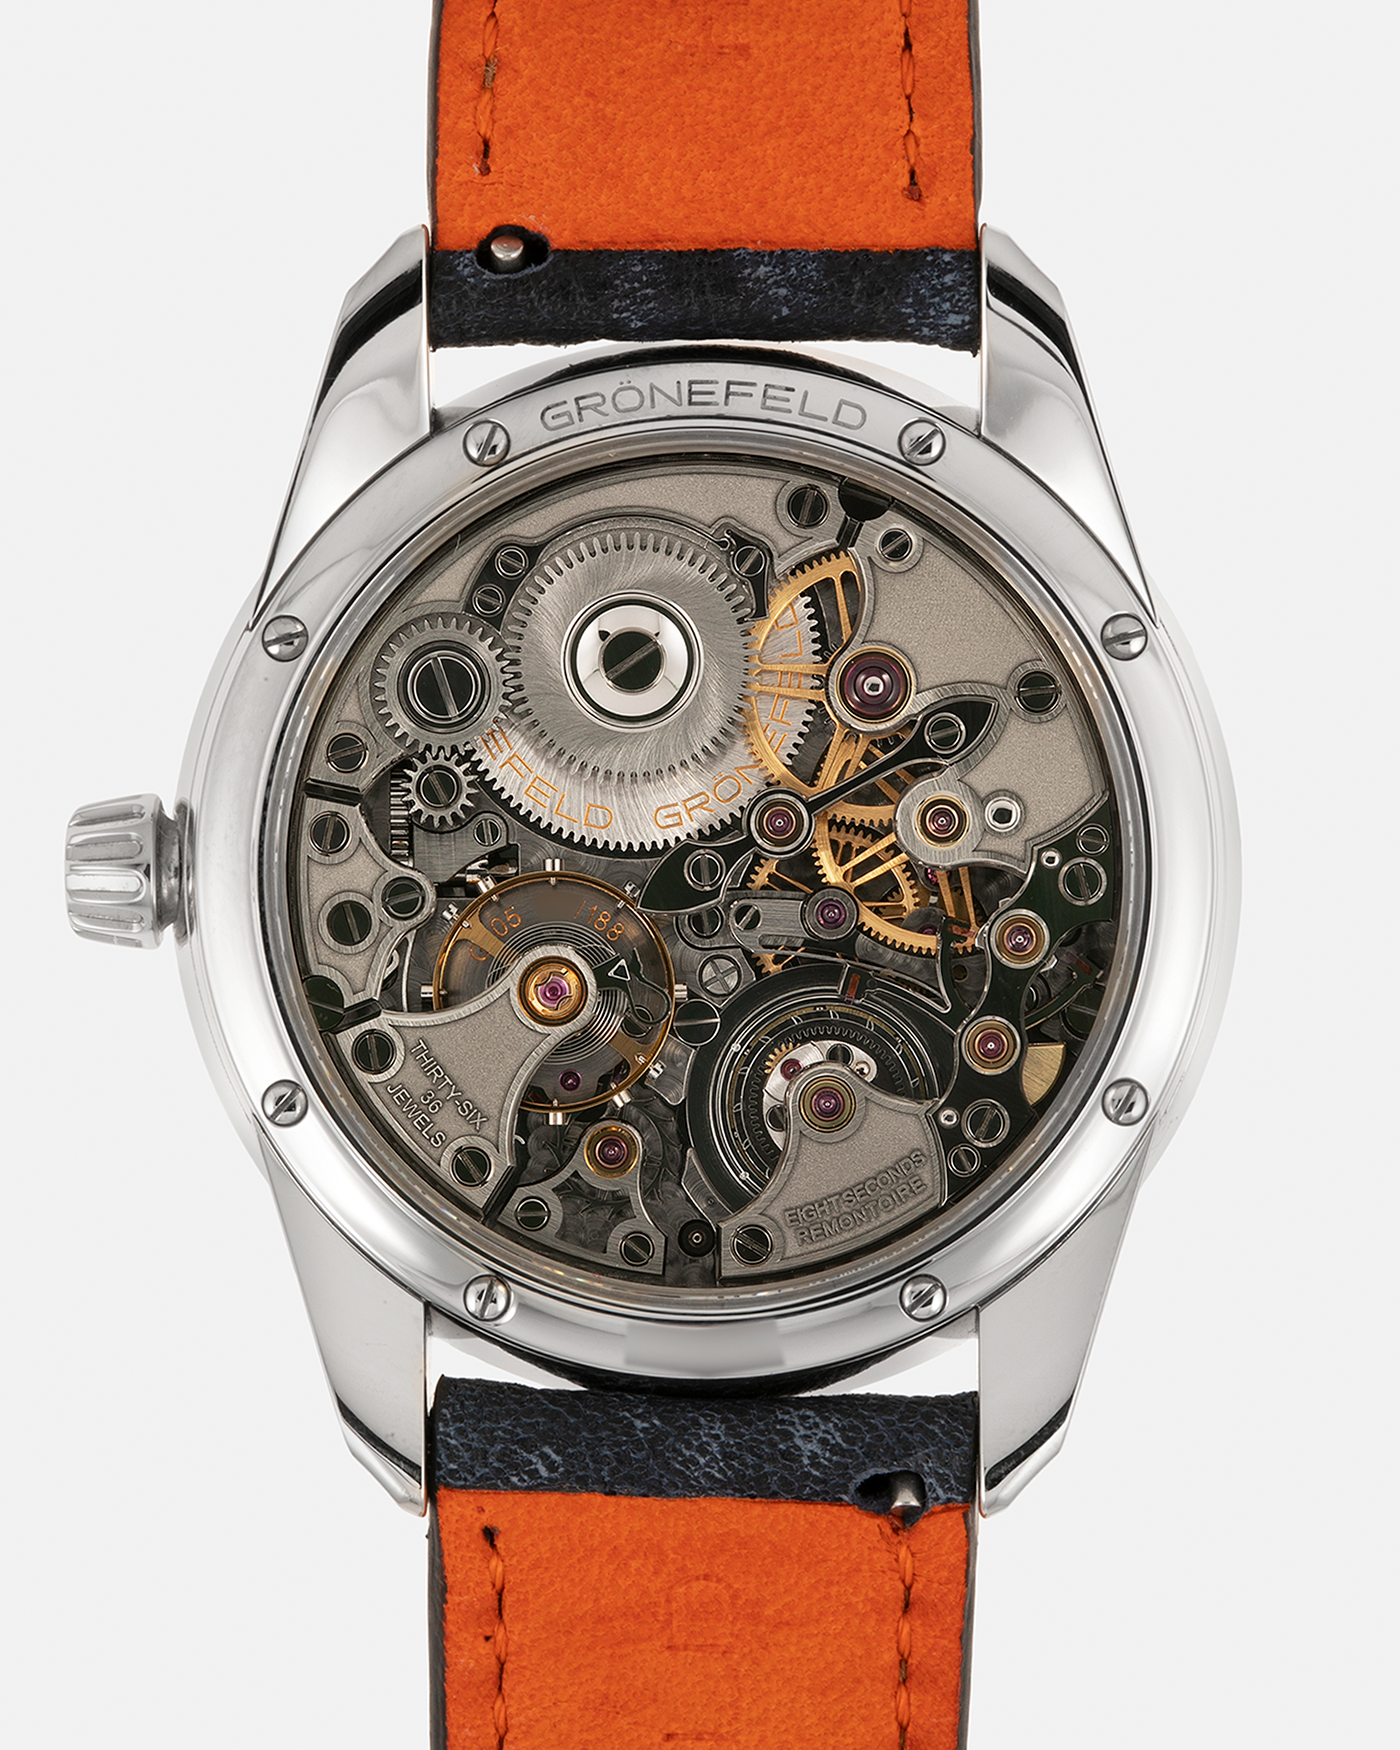 Brand: Grönefeld Year: XXXX Model: 1941 Remontoire ‘Salmon’ Material: Stainless Steel Movement: Grönefeld Cal. G-05, Manual-Winding Case Dimensions: 39.5mm x  10.5mm Lug Width: 20mm Strap: Grönefeld Blue Ostrich / Dutch Orange Leather Strap with Signed Stainless Steel 916L Tang Buckle